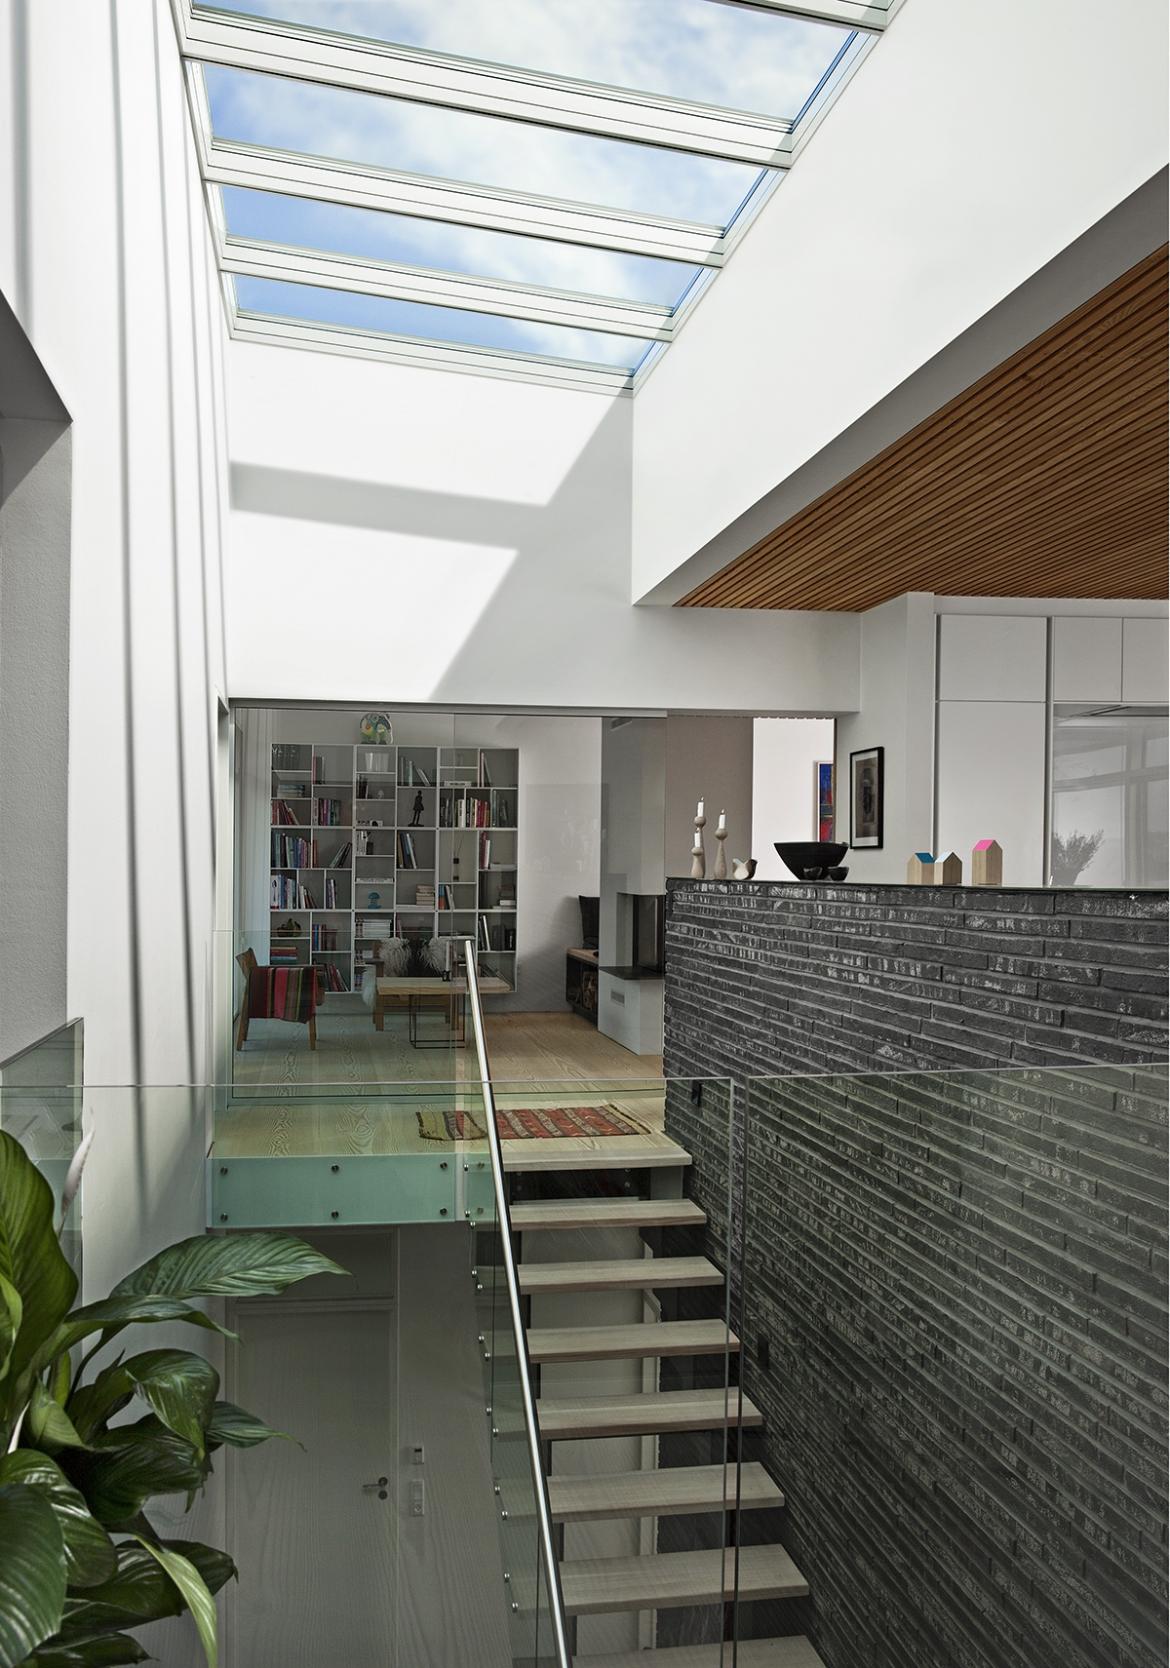 Velux America has created a new Venting Modular Skylight (VMS) line that is designed to open up large spaces while creating a light-filled and spacious environment.